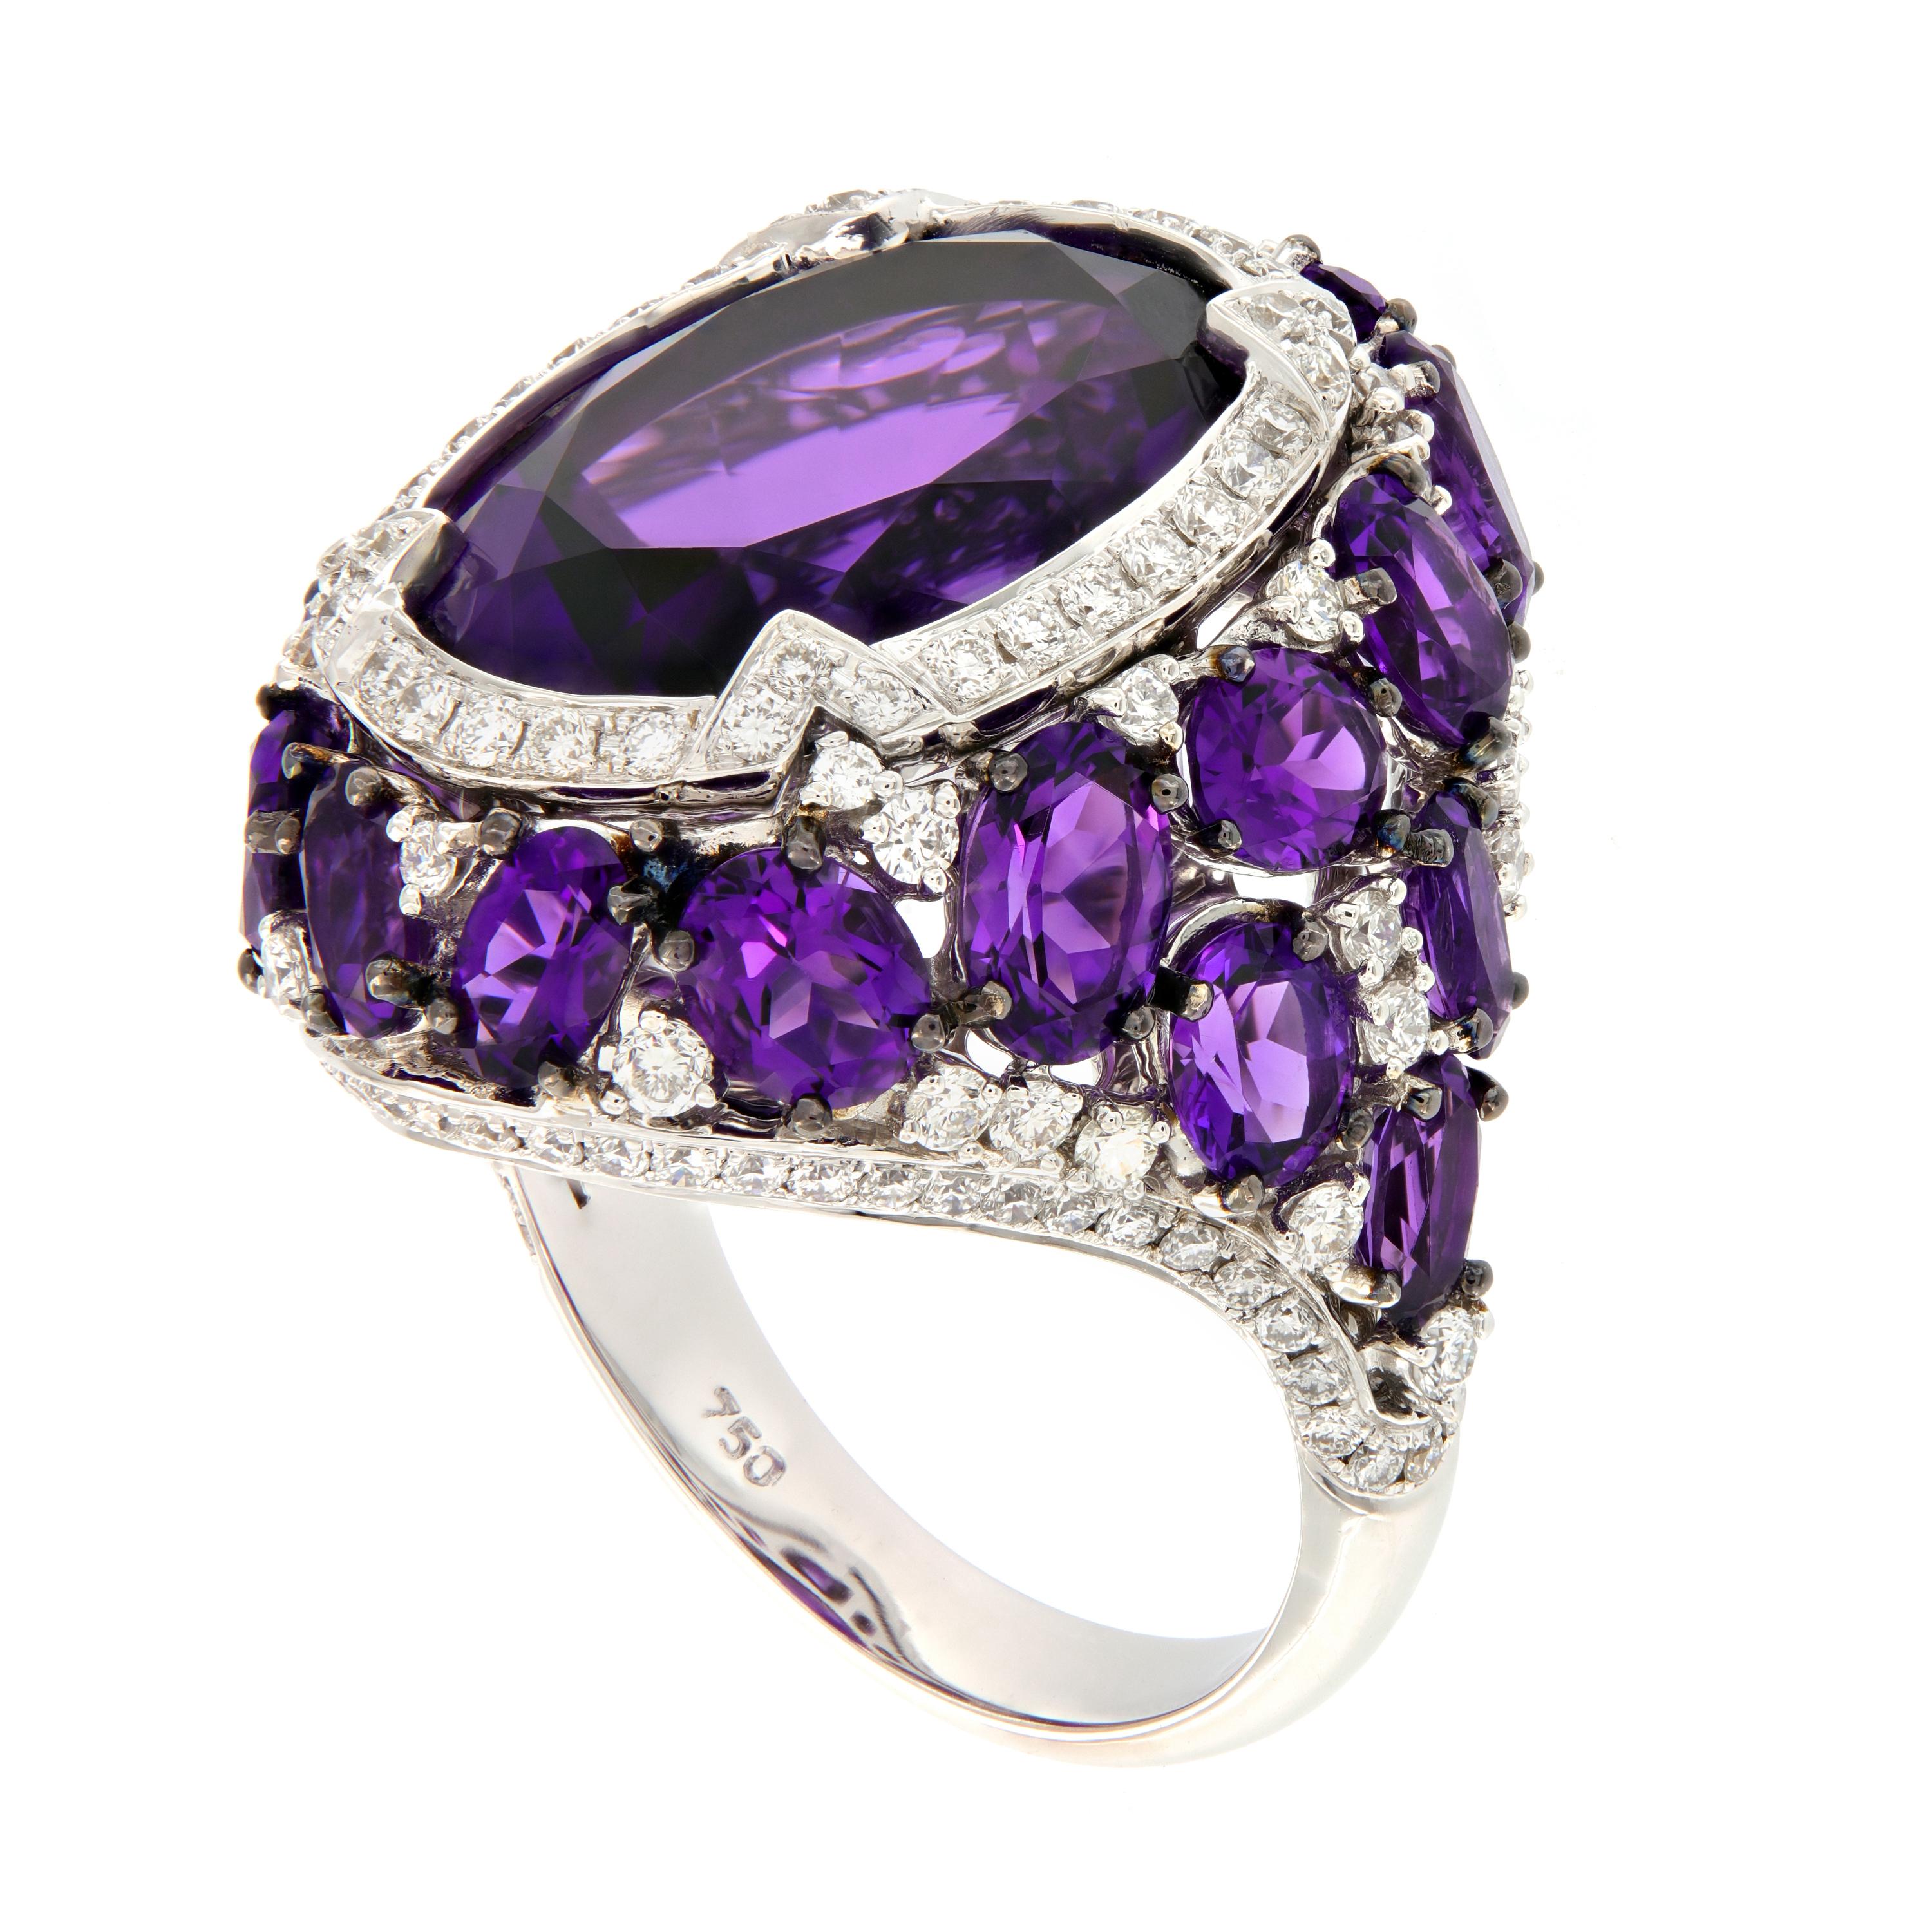 A beautiful deep purple oval-cut amethyst is artfully enhanced by 21 smaller oval amethysts and over one carat of diamonds. This exquisite cocktail ring is beautifully crafted in Switzerland for CAMPANELLI & PEAR 18k white gold. 
Ring size is 6.25.